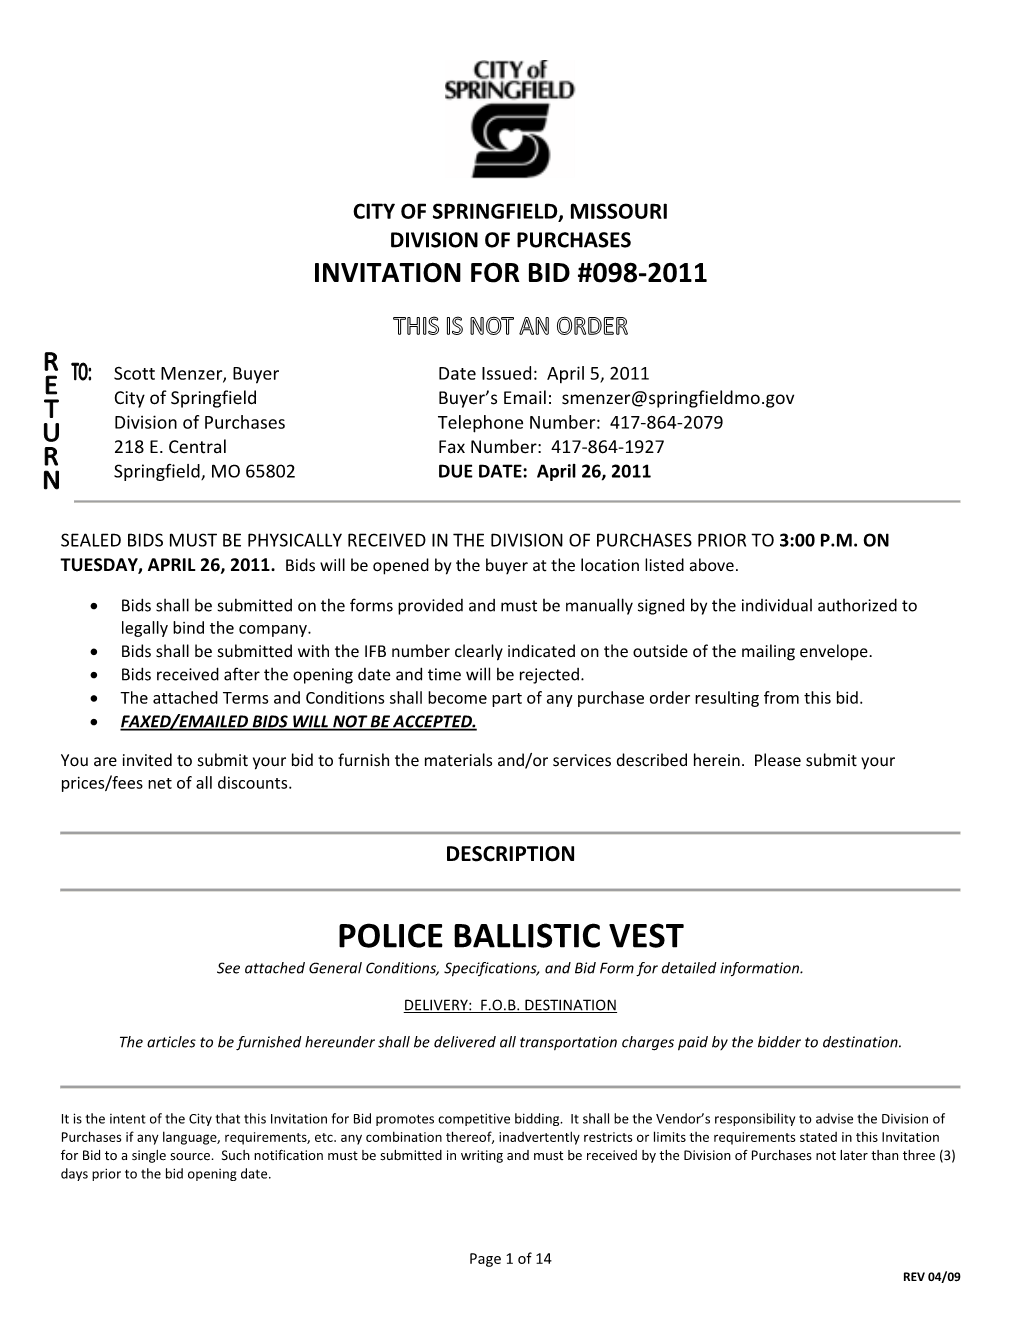 POLICE BALLISTIC VEST See Attached General Conditions, Specifications, and Bid Form for Detailed Information